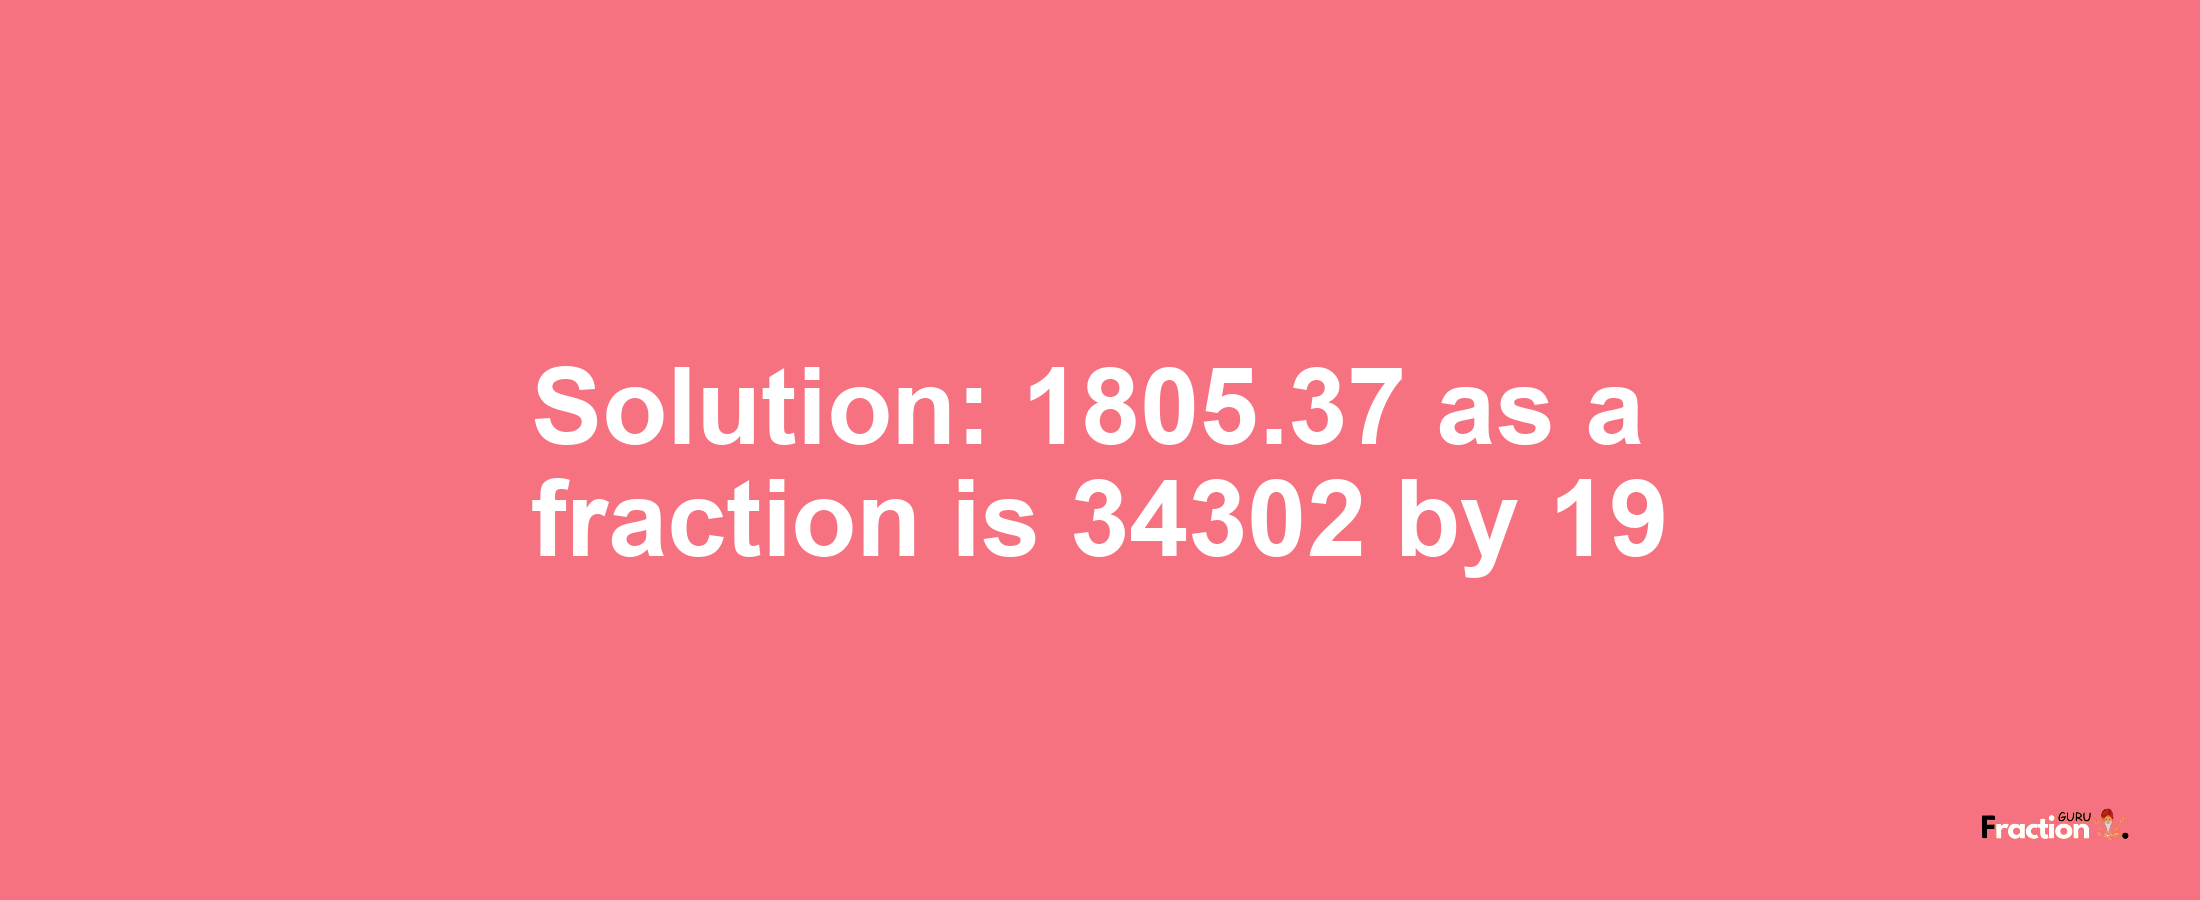 Solution:1805.37 as a fraction is 34302/19